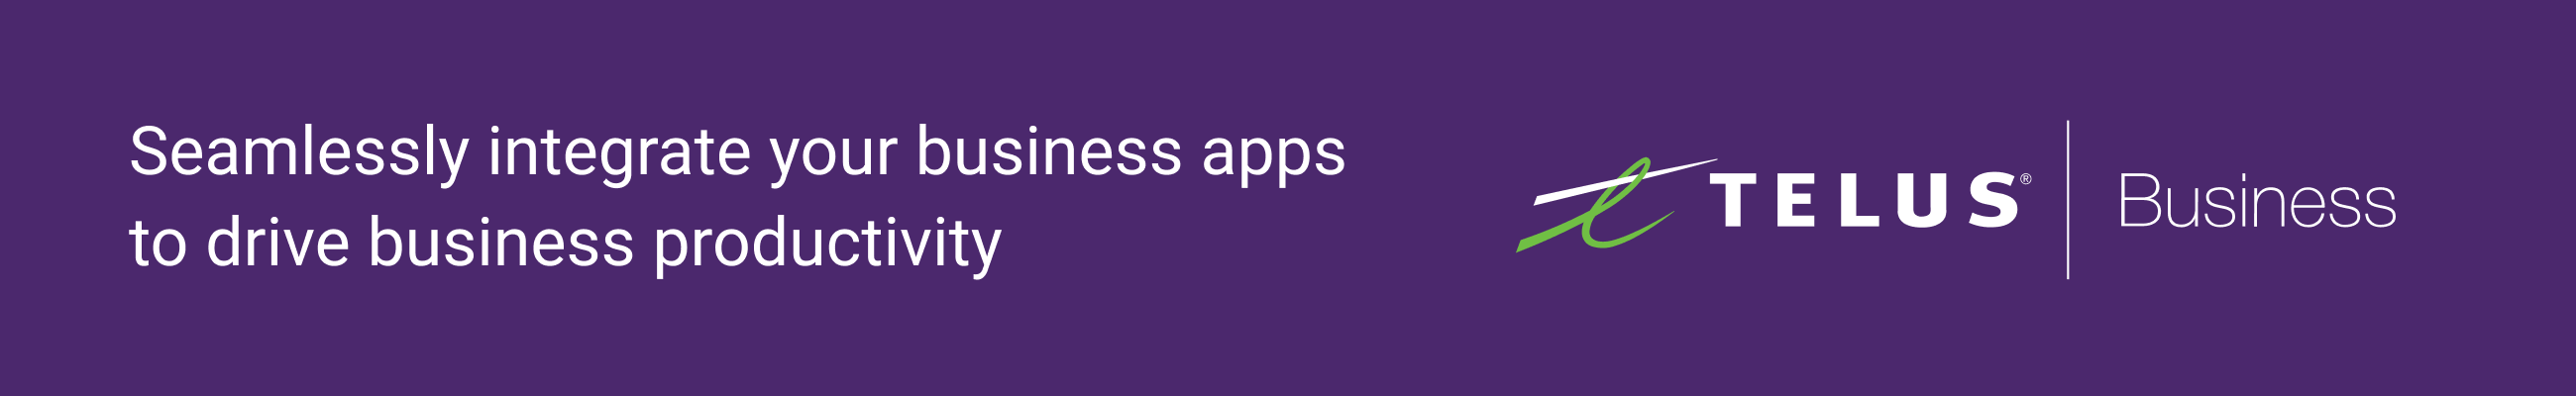 Seamlessly integrate your business apps to drive business productivity.